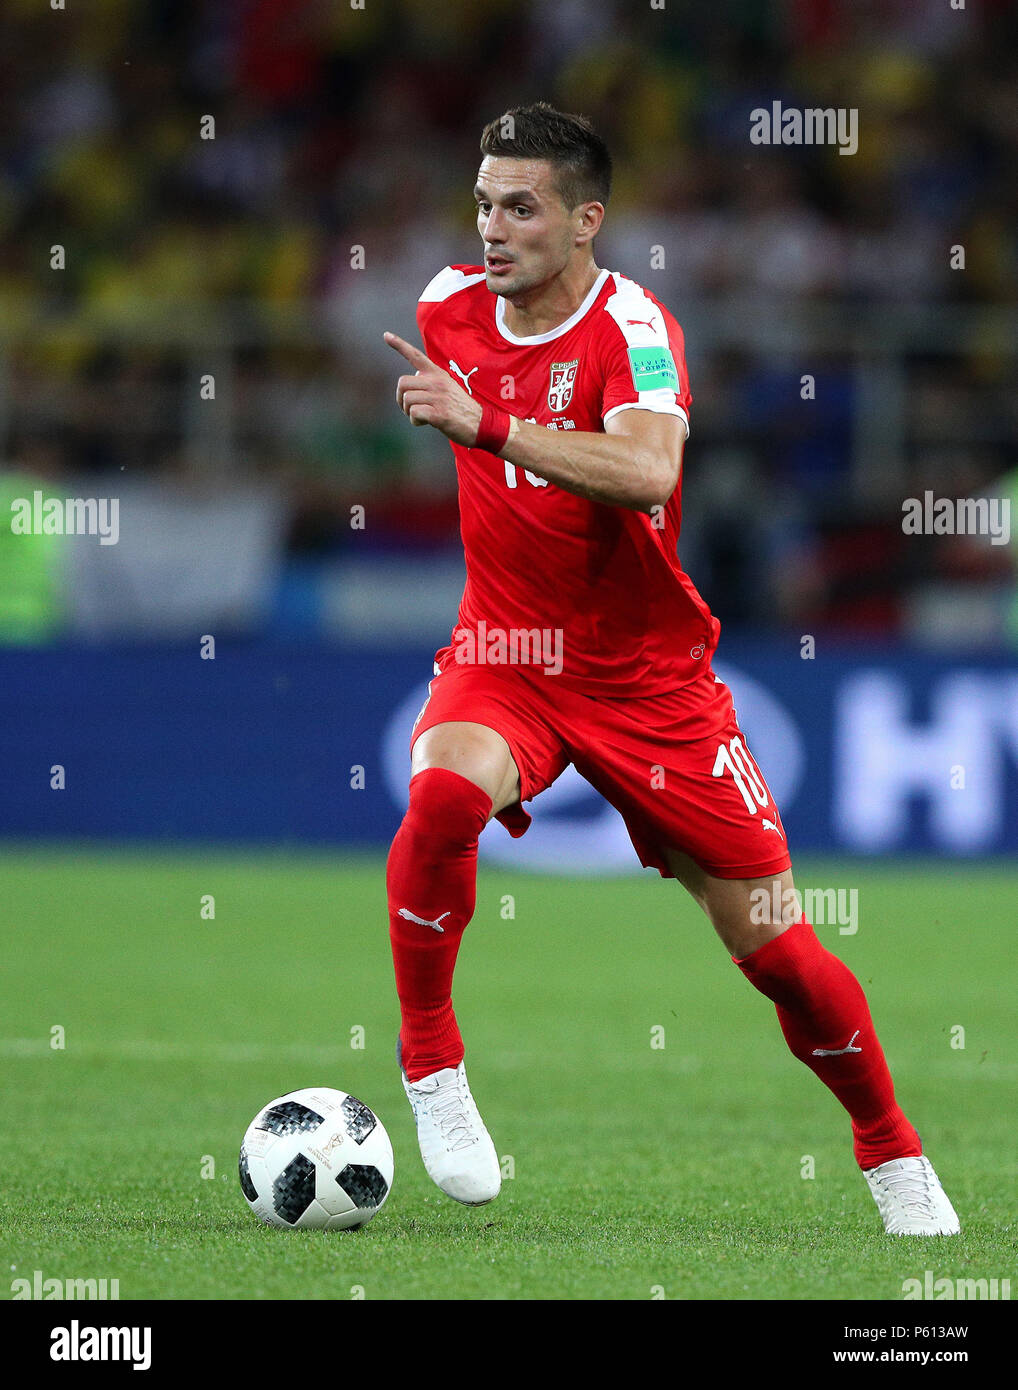 Moscow, Russia, 27 June 2018. SERBIA VS BRAZIL - Dusan TADIC of Serbia during the match between Serbia and Brazil valid for the 2018 World Cup held at the Otkrytie Arena (Spartak) in Moscow, Russia. (Photo: Rodolfo Buhrer/La Imagem/Fotoarena) Credit: Foto Arena LTDA/Alamy Live News Stock Photo